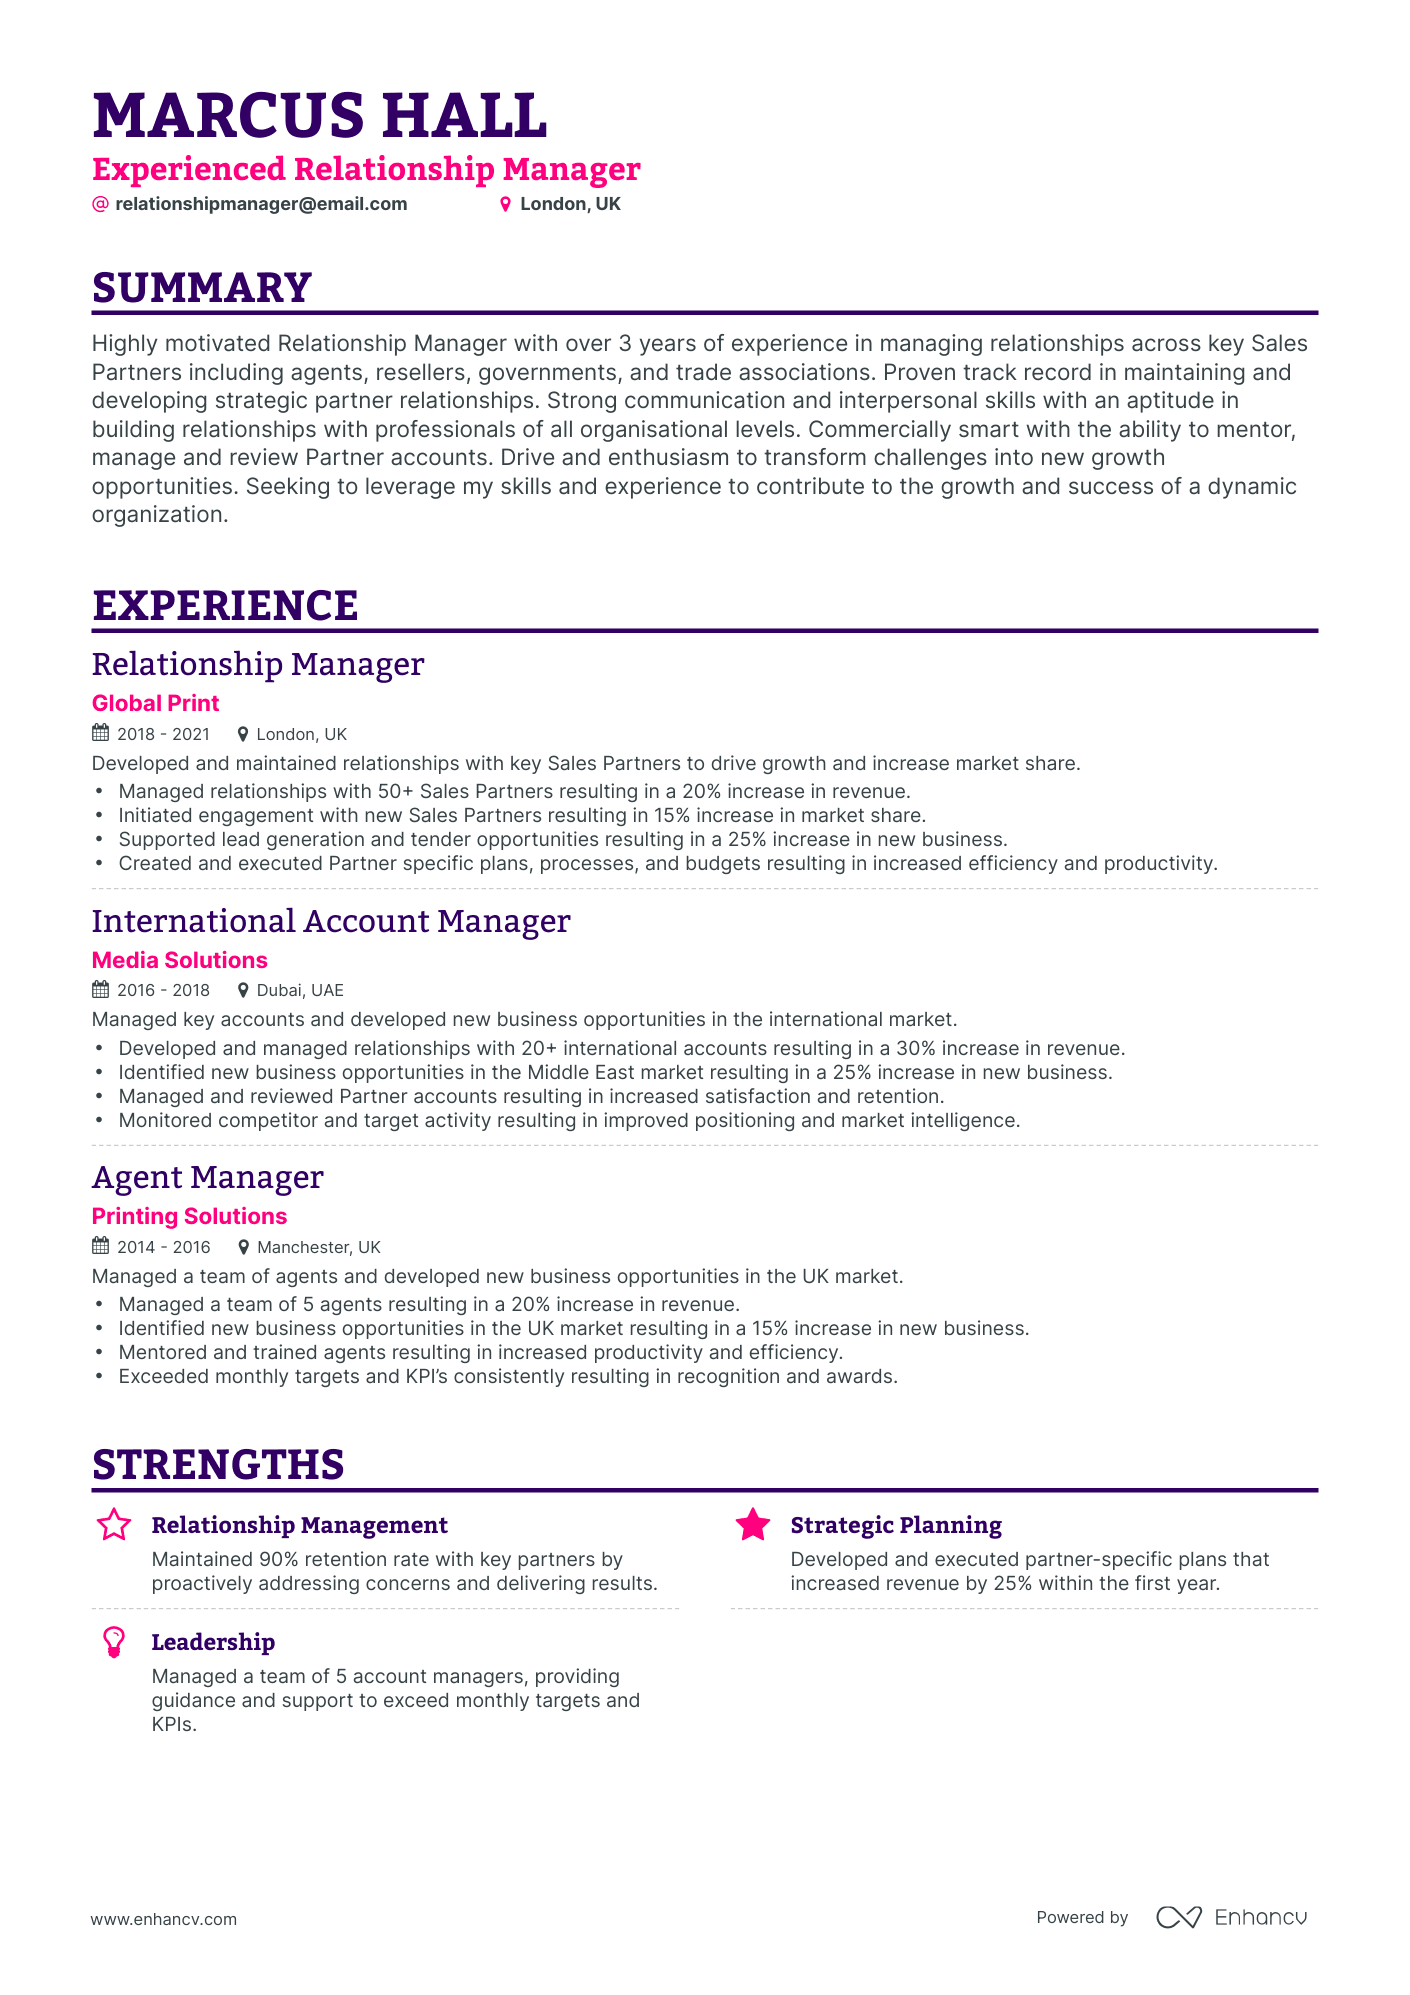 Classic Relationship Manager Resume Template